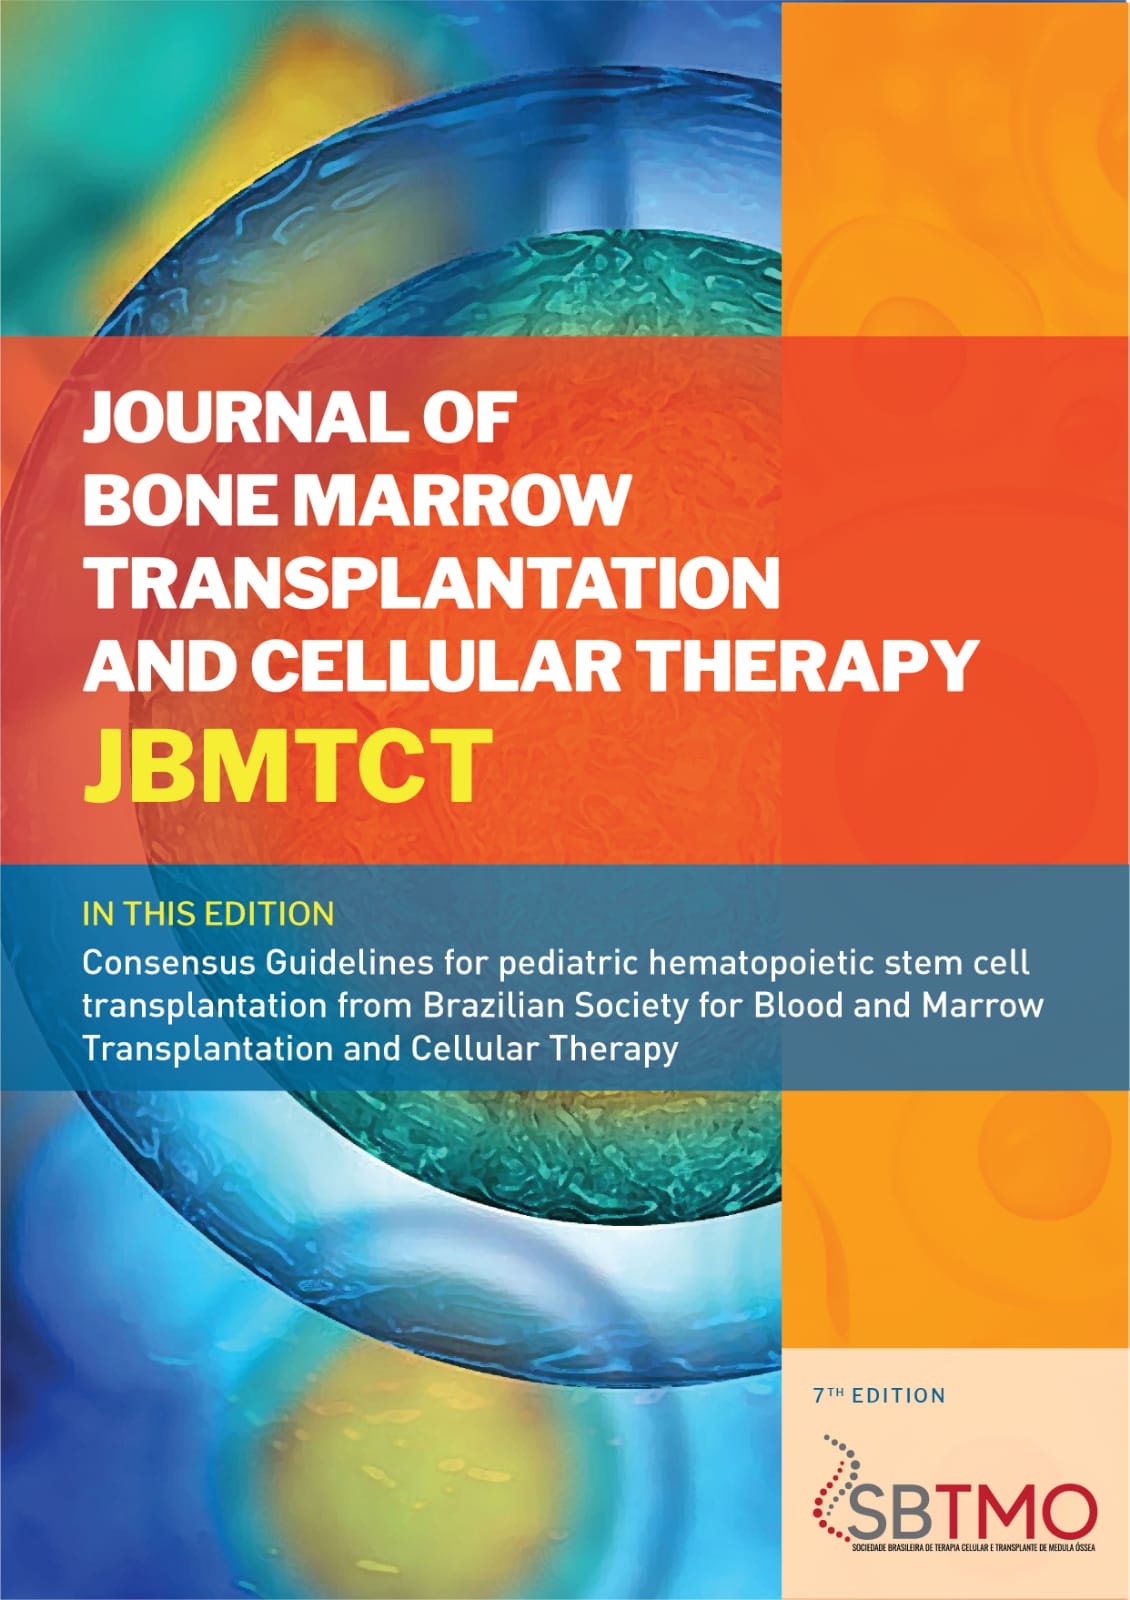 					View Vol. 2 No. 4 (2021): JOURNAL OF BONE MARROW TRANSPLANTATION AND CELLULAR THERAPY
				